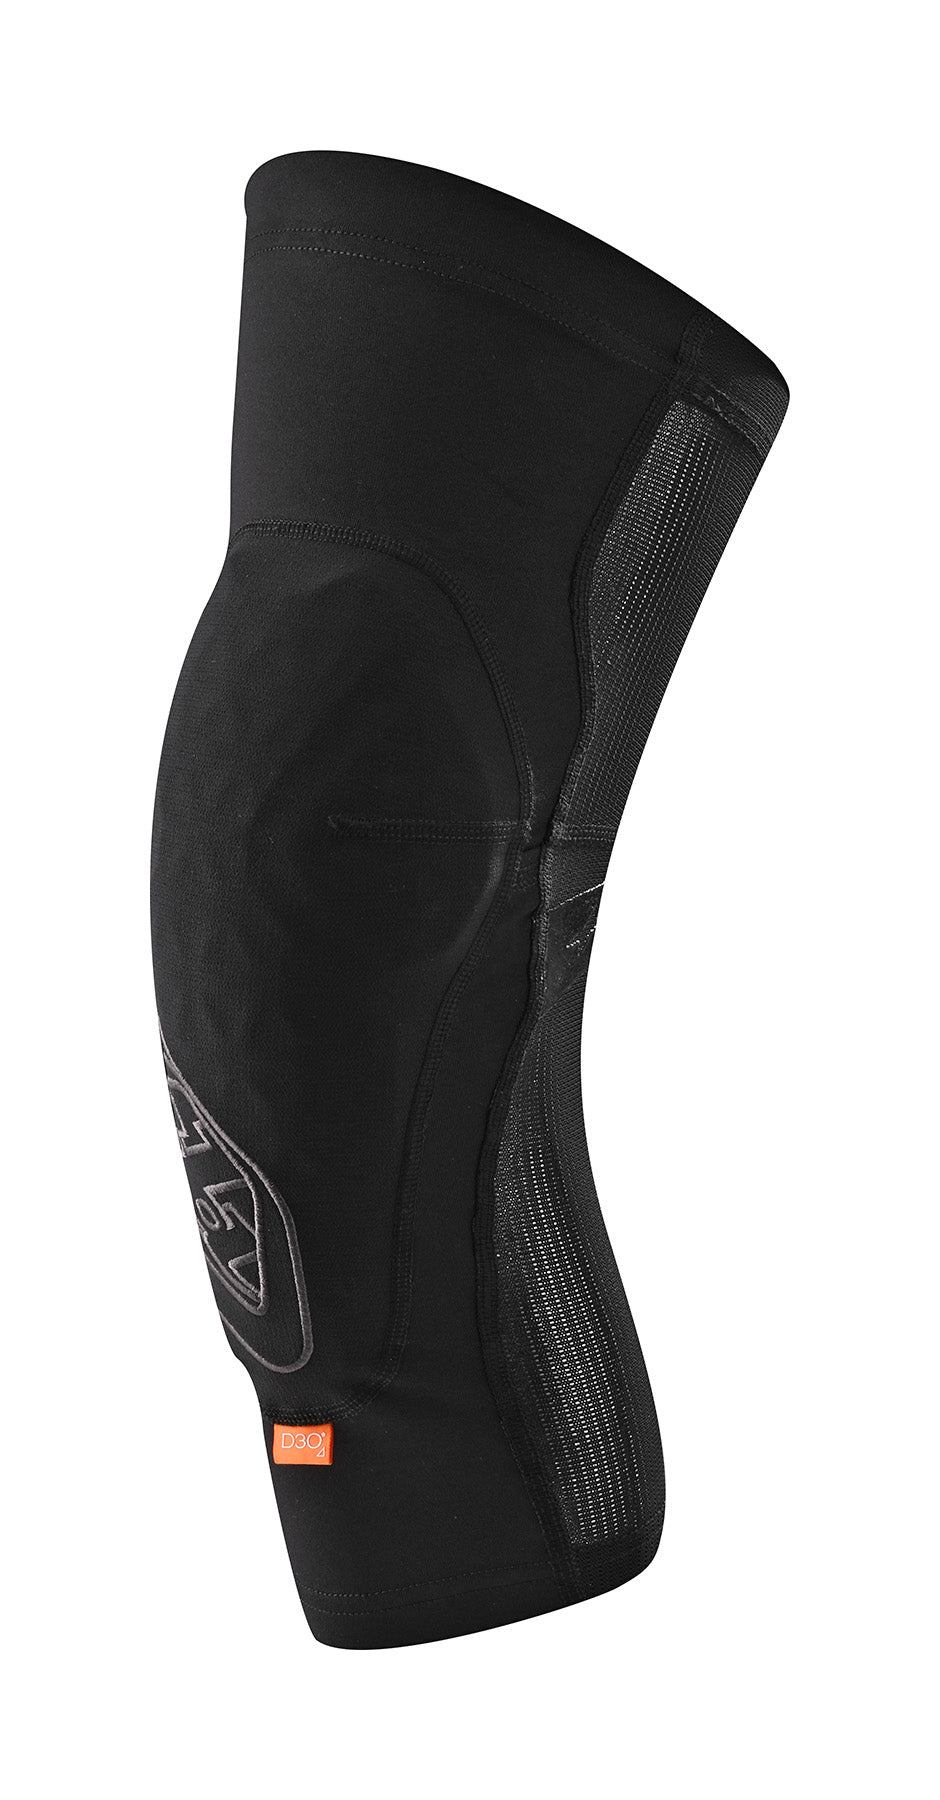 TLD Stage Knee Guards